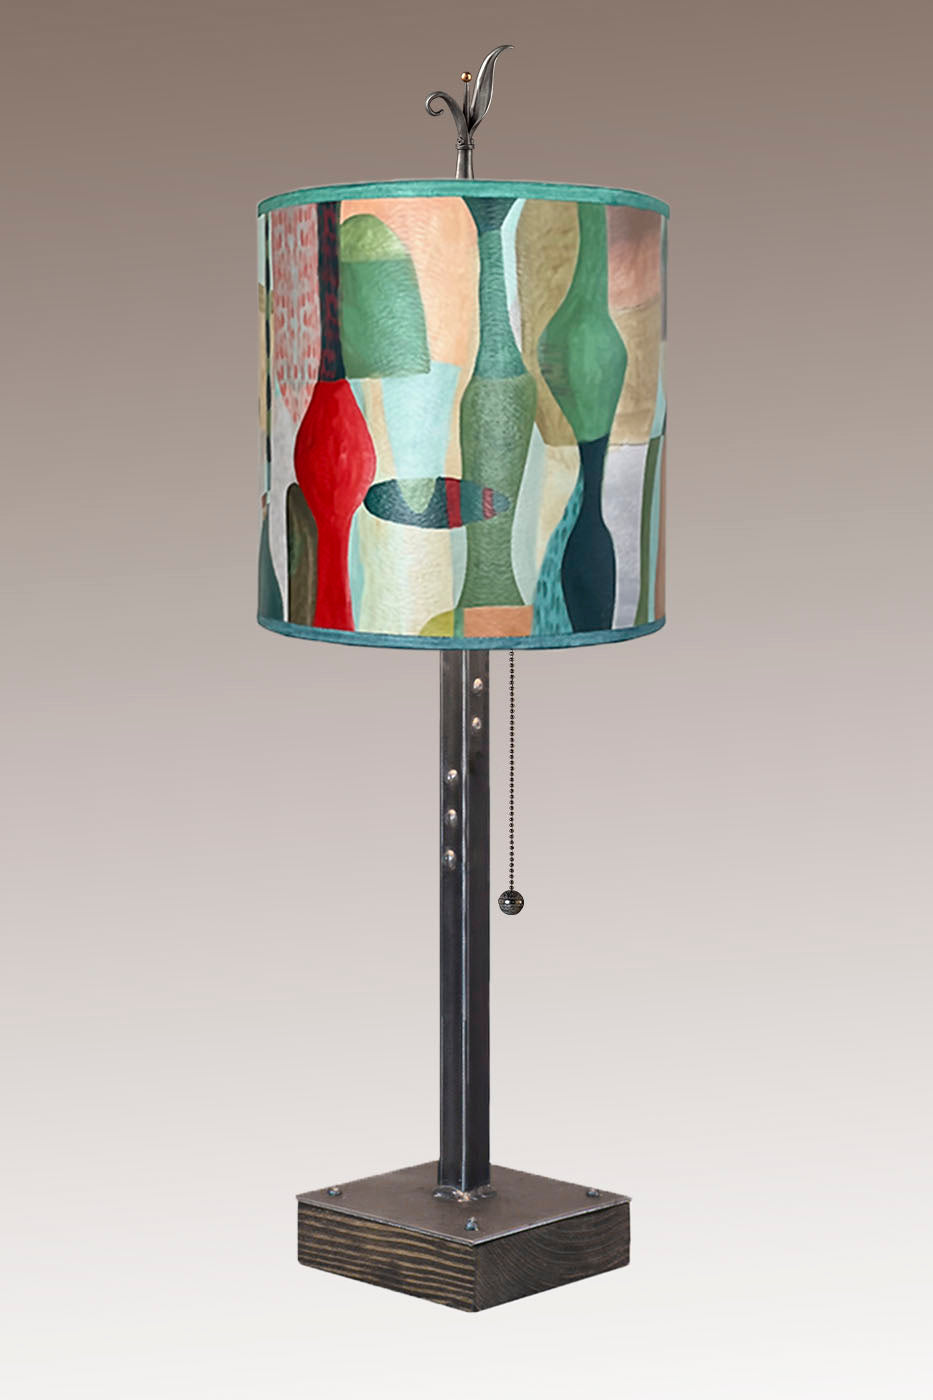 Steel Table Lamp on Wood with Medium Drum Shade in Riviera in Poppy